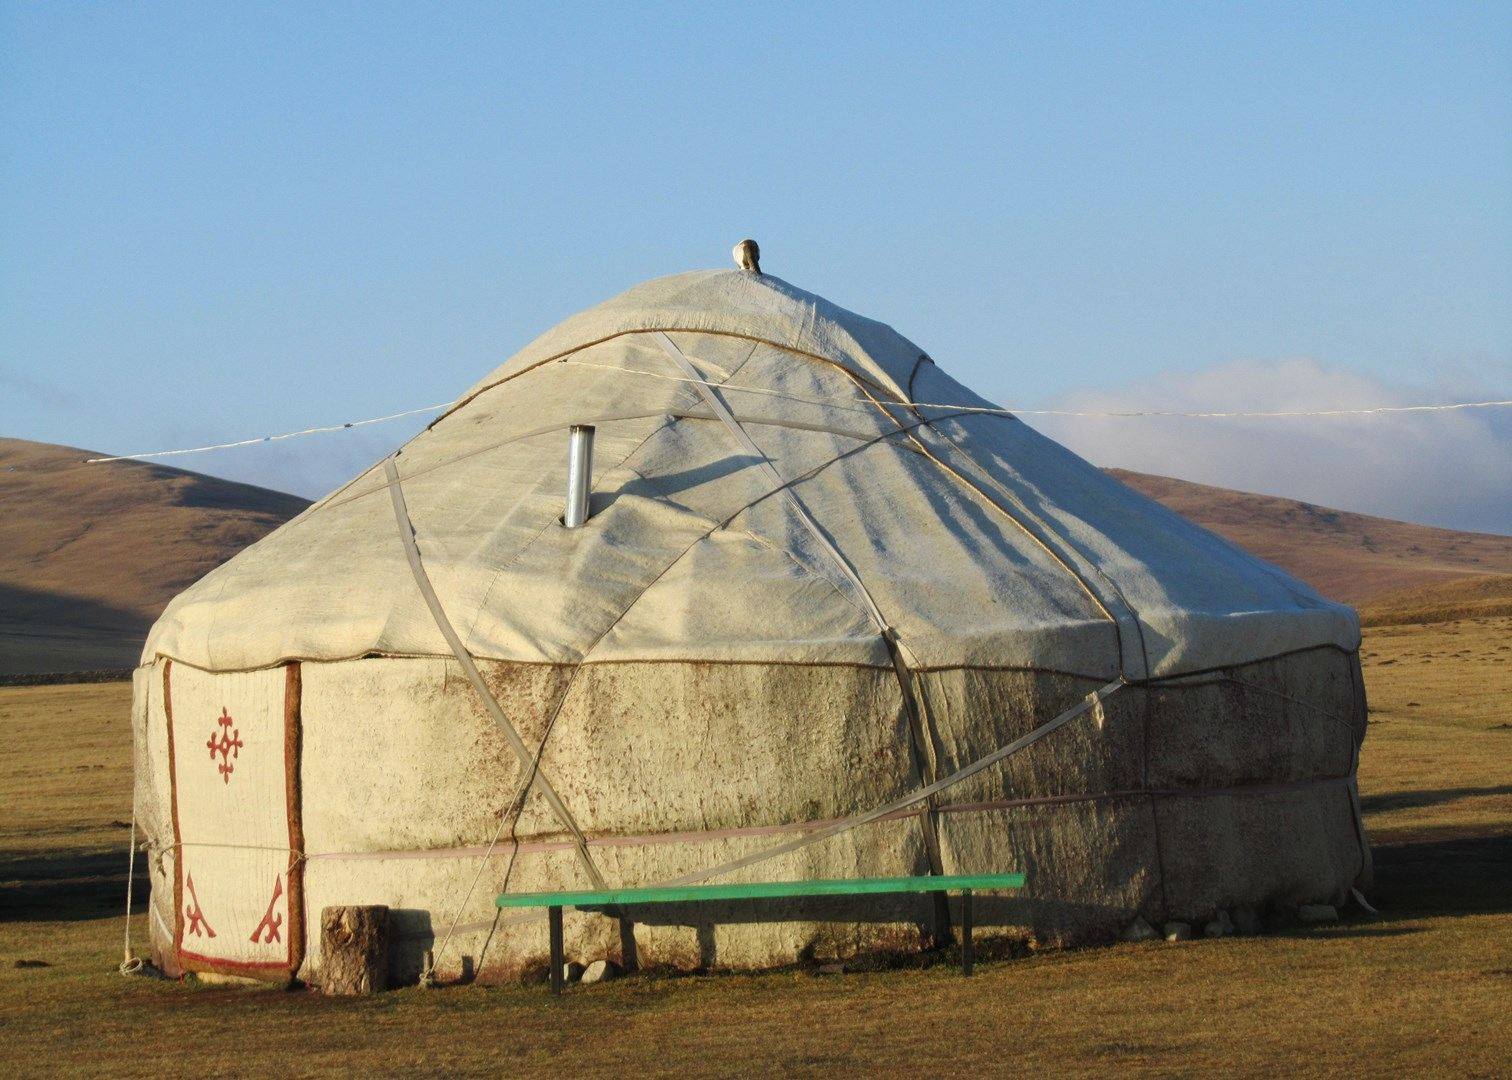 Yurts-domed tents made from felt